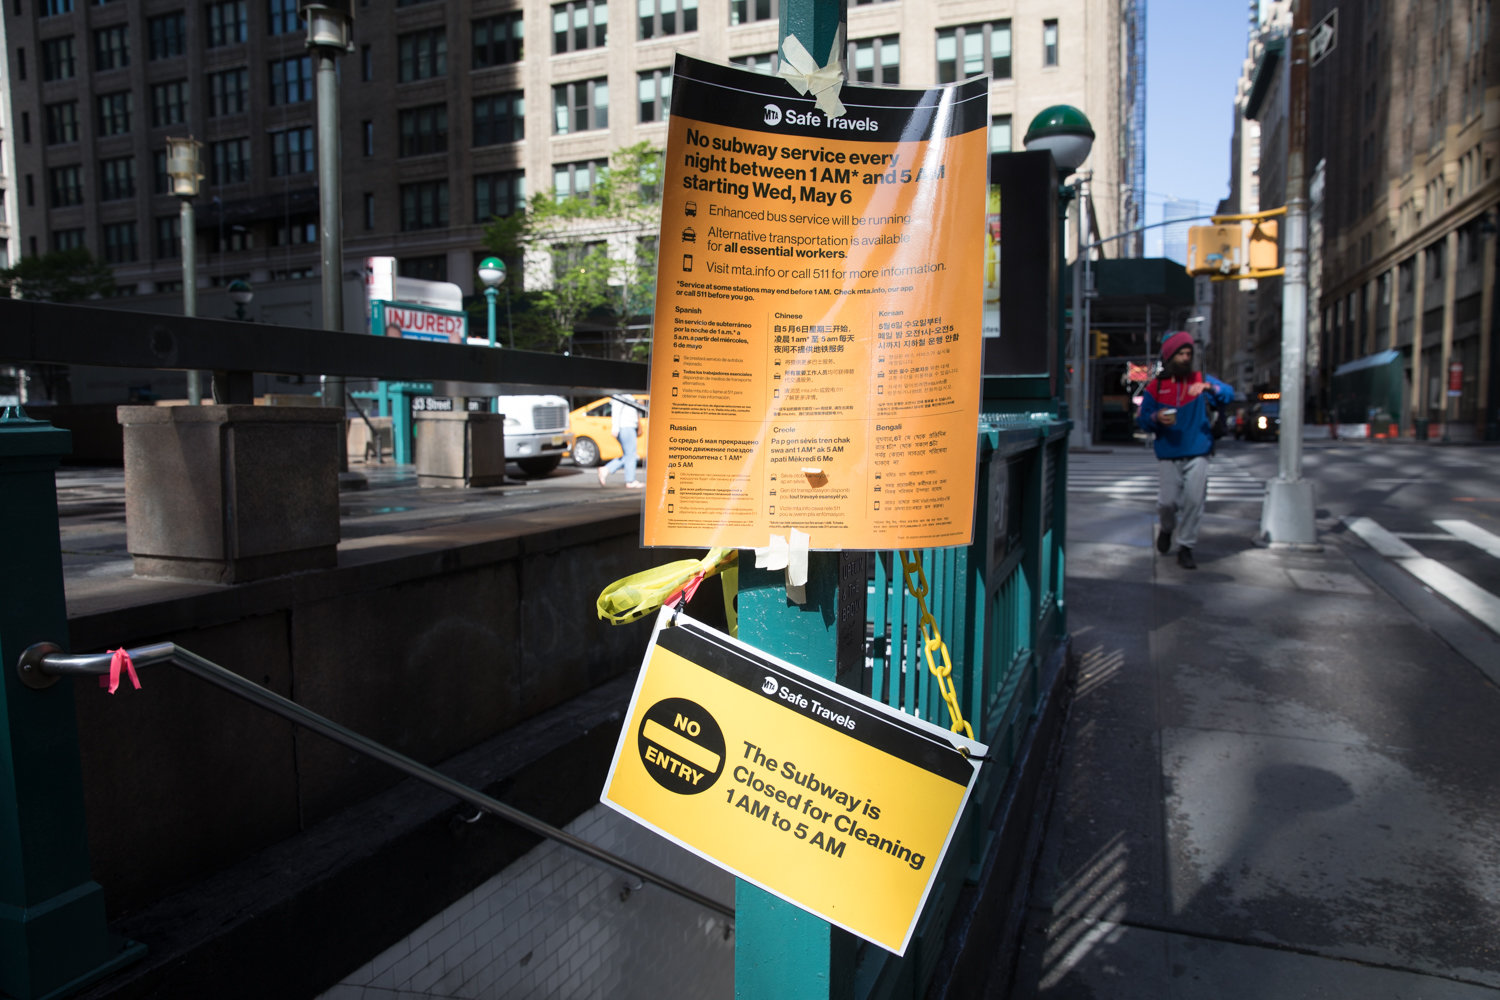 Signs inform passersby of the overnight closure of the subway system beginning at 1 a.m., which not only has made trips by ‘essential’ commuters more difficult, but has also displaced hundreds of homeless people who have found the subway to be a sort of overnight shelter.